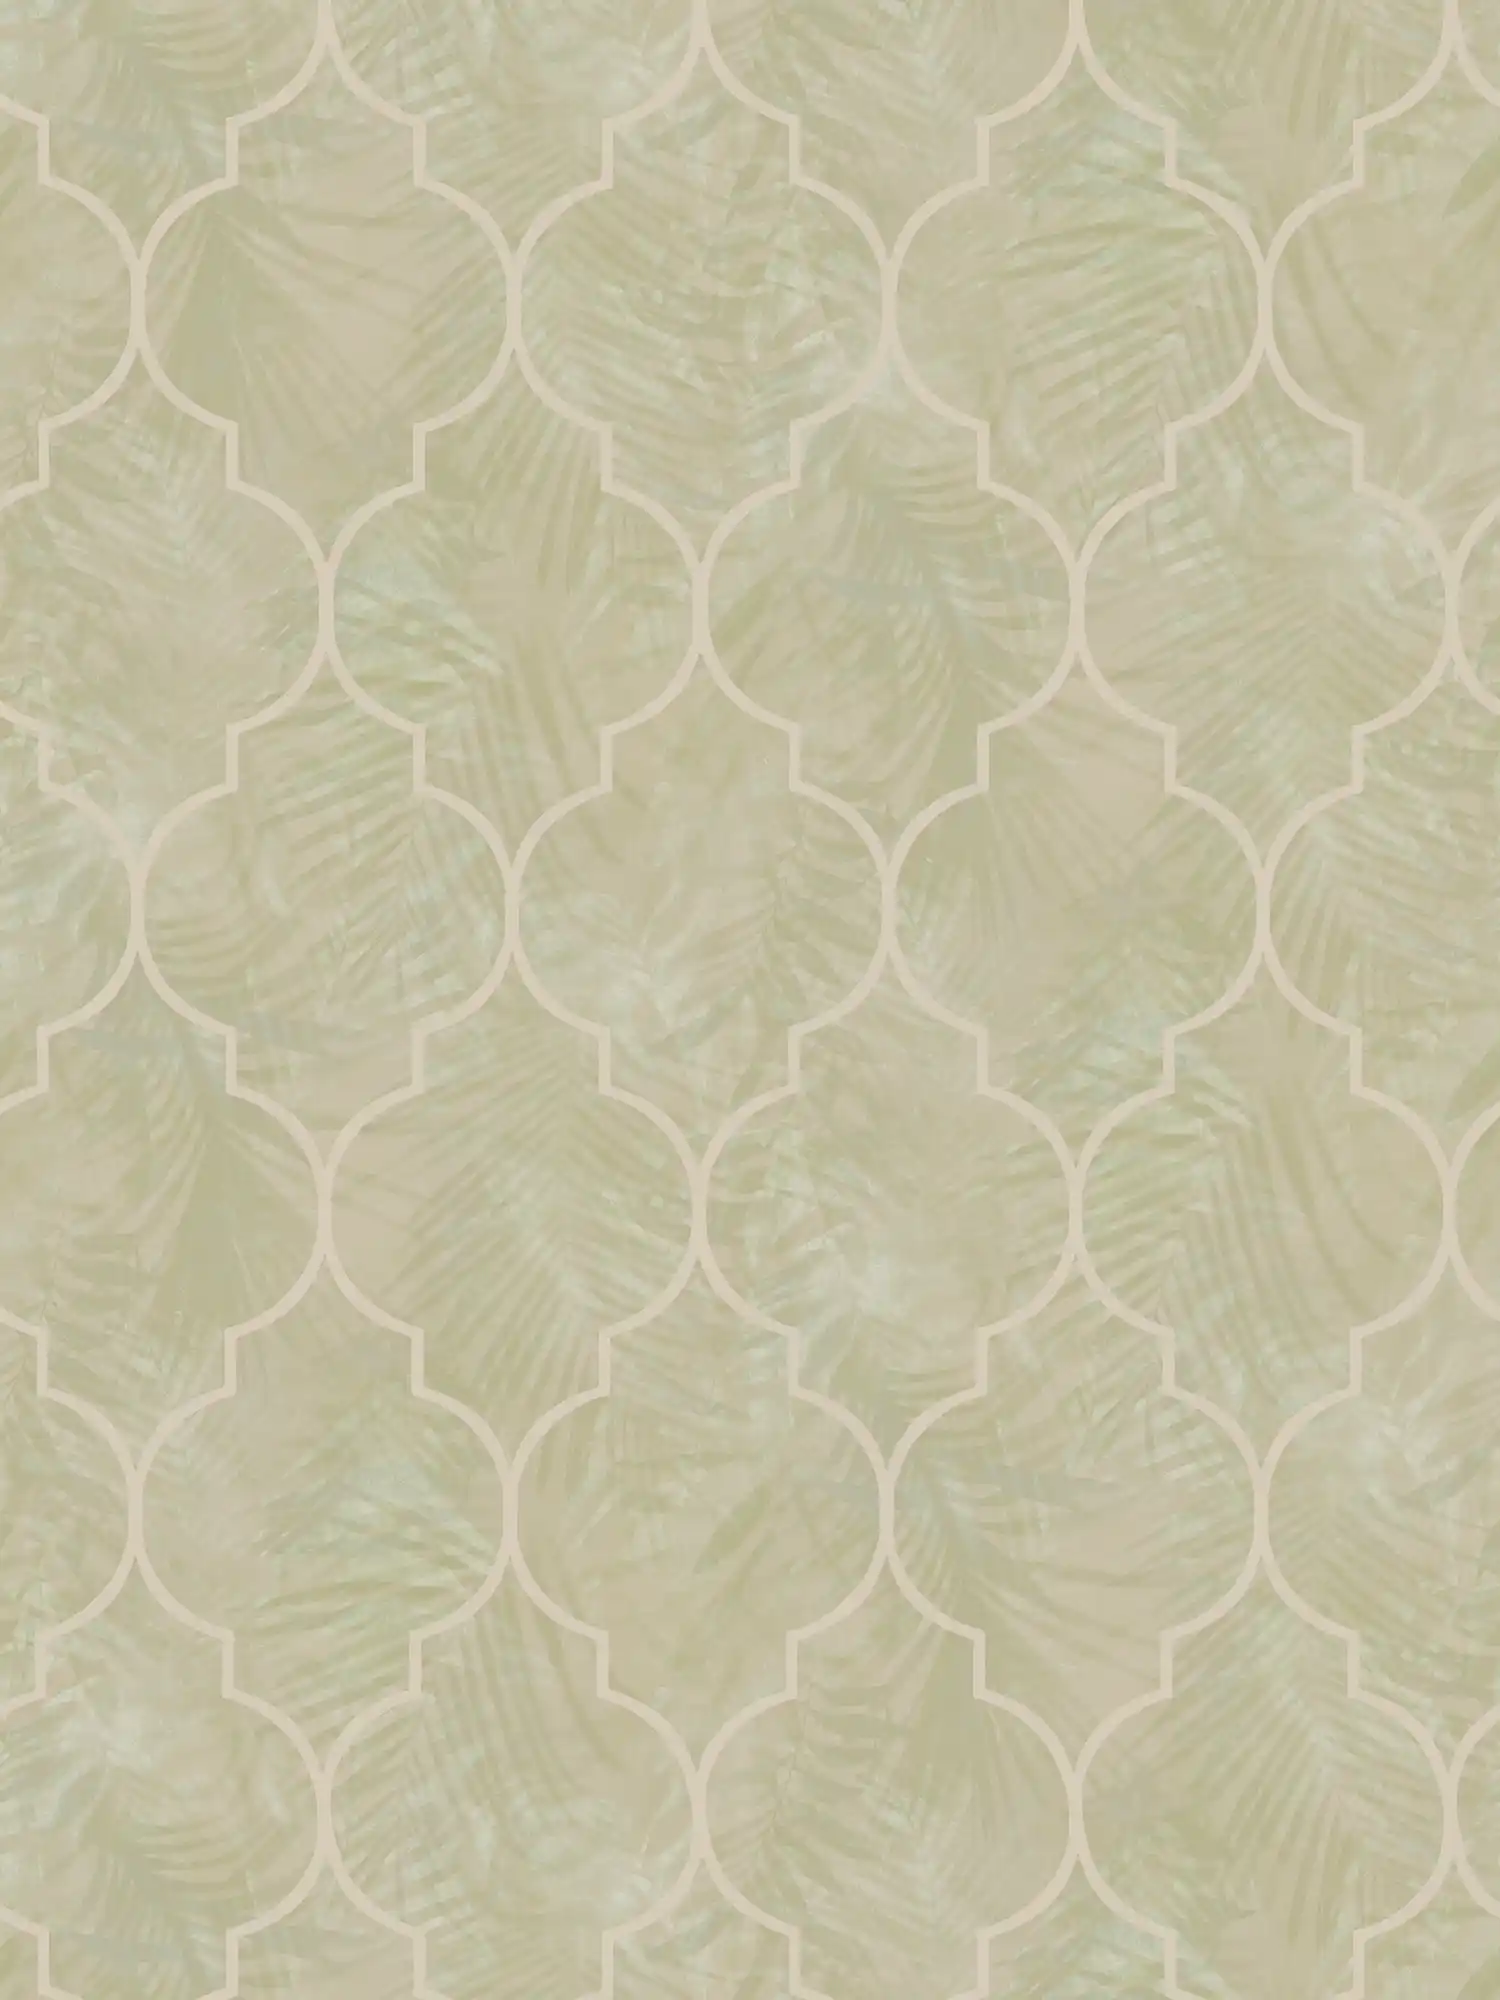 Floral Leaves Wallpaper with Tiles Ornament - Beige
